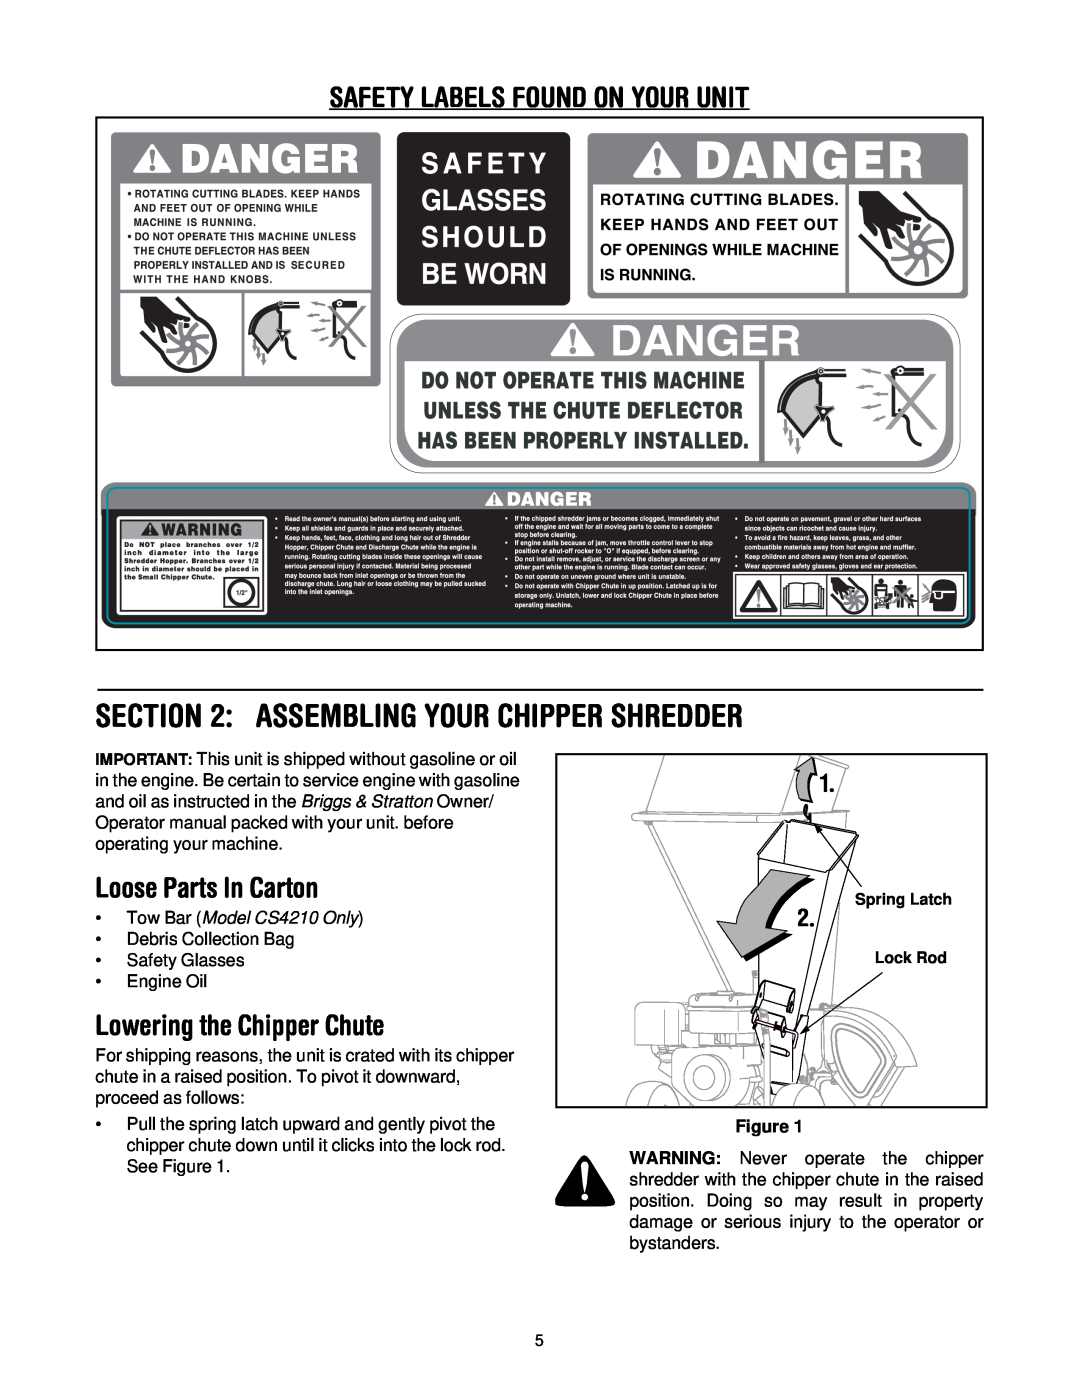 Troy-Bilt CS4210, CS4265 manual Assembling Your Chipper Shredder, Safety Labels Found On Your Unit, Loose Parts In Carton 